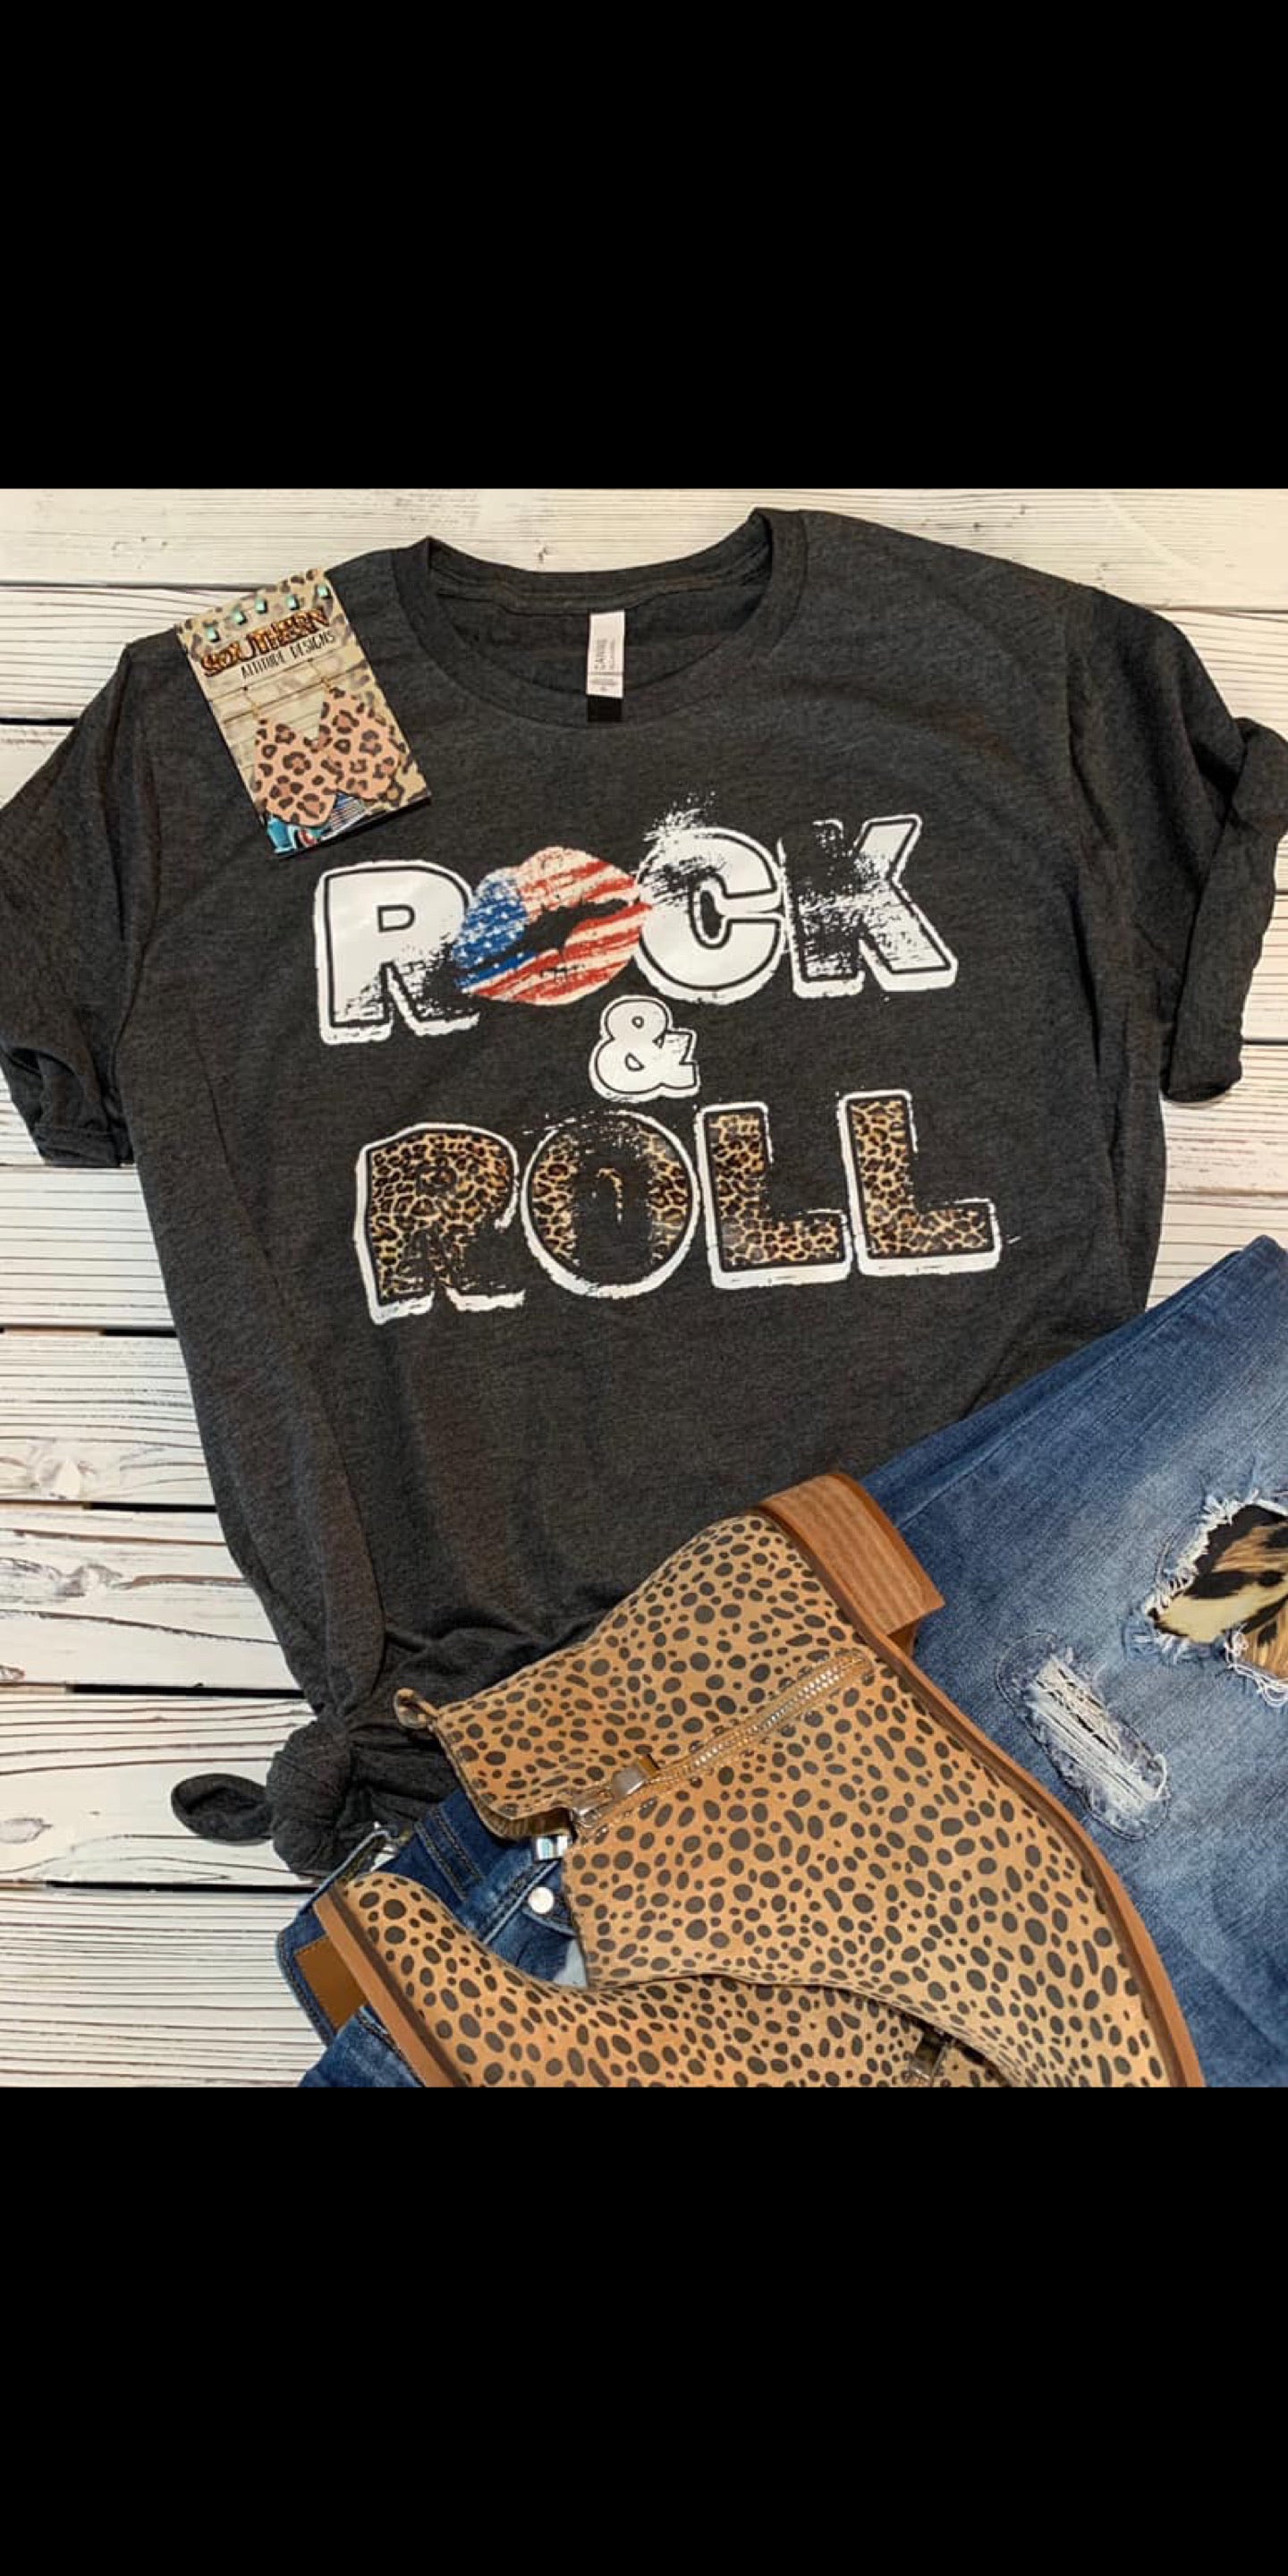 plus size rock and roll clothing